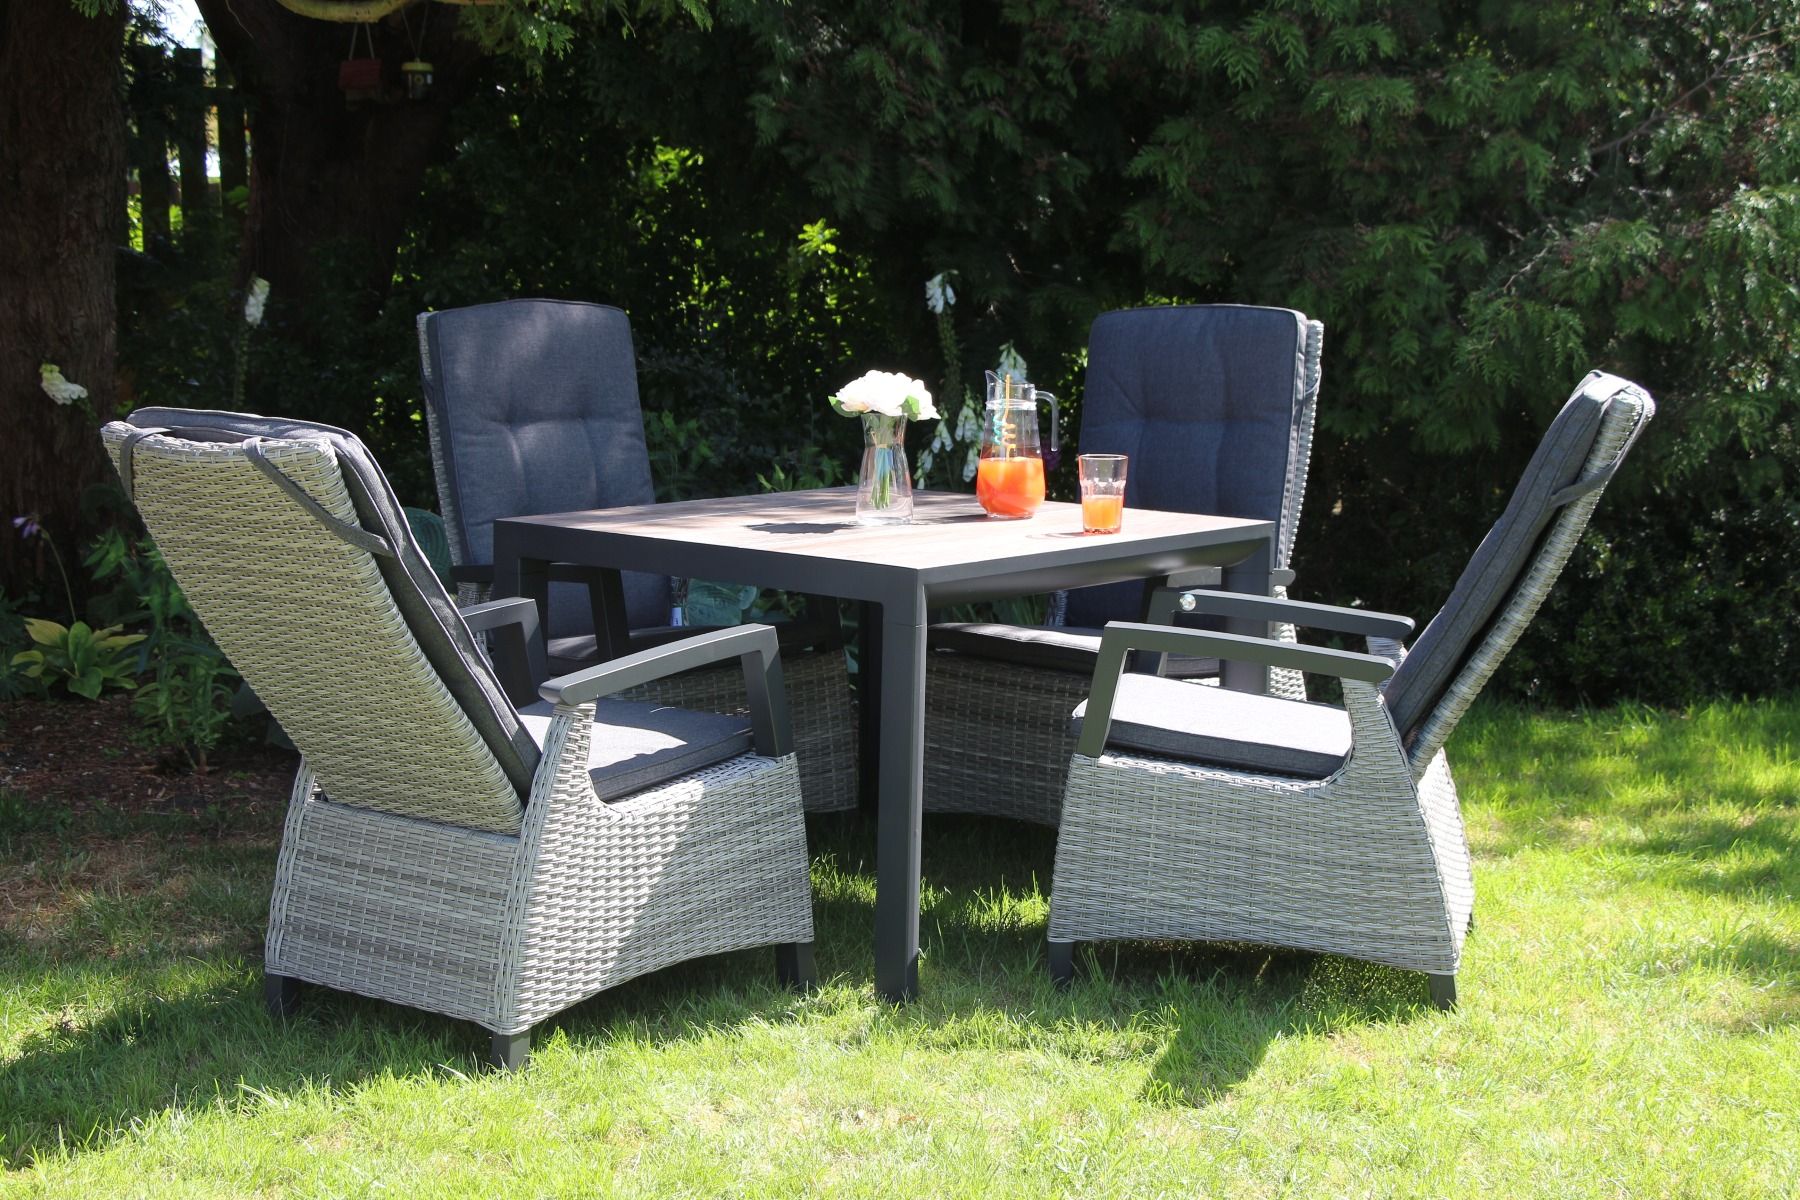 Relaxing reclining garden furniture sets available at Hilltop